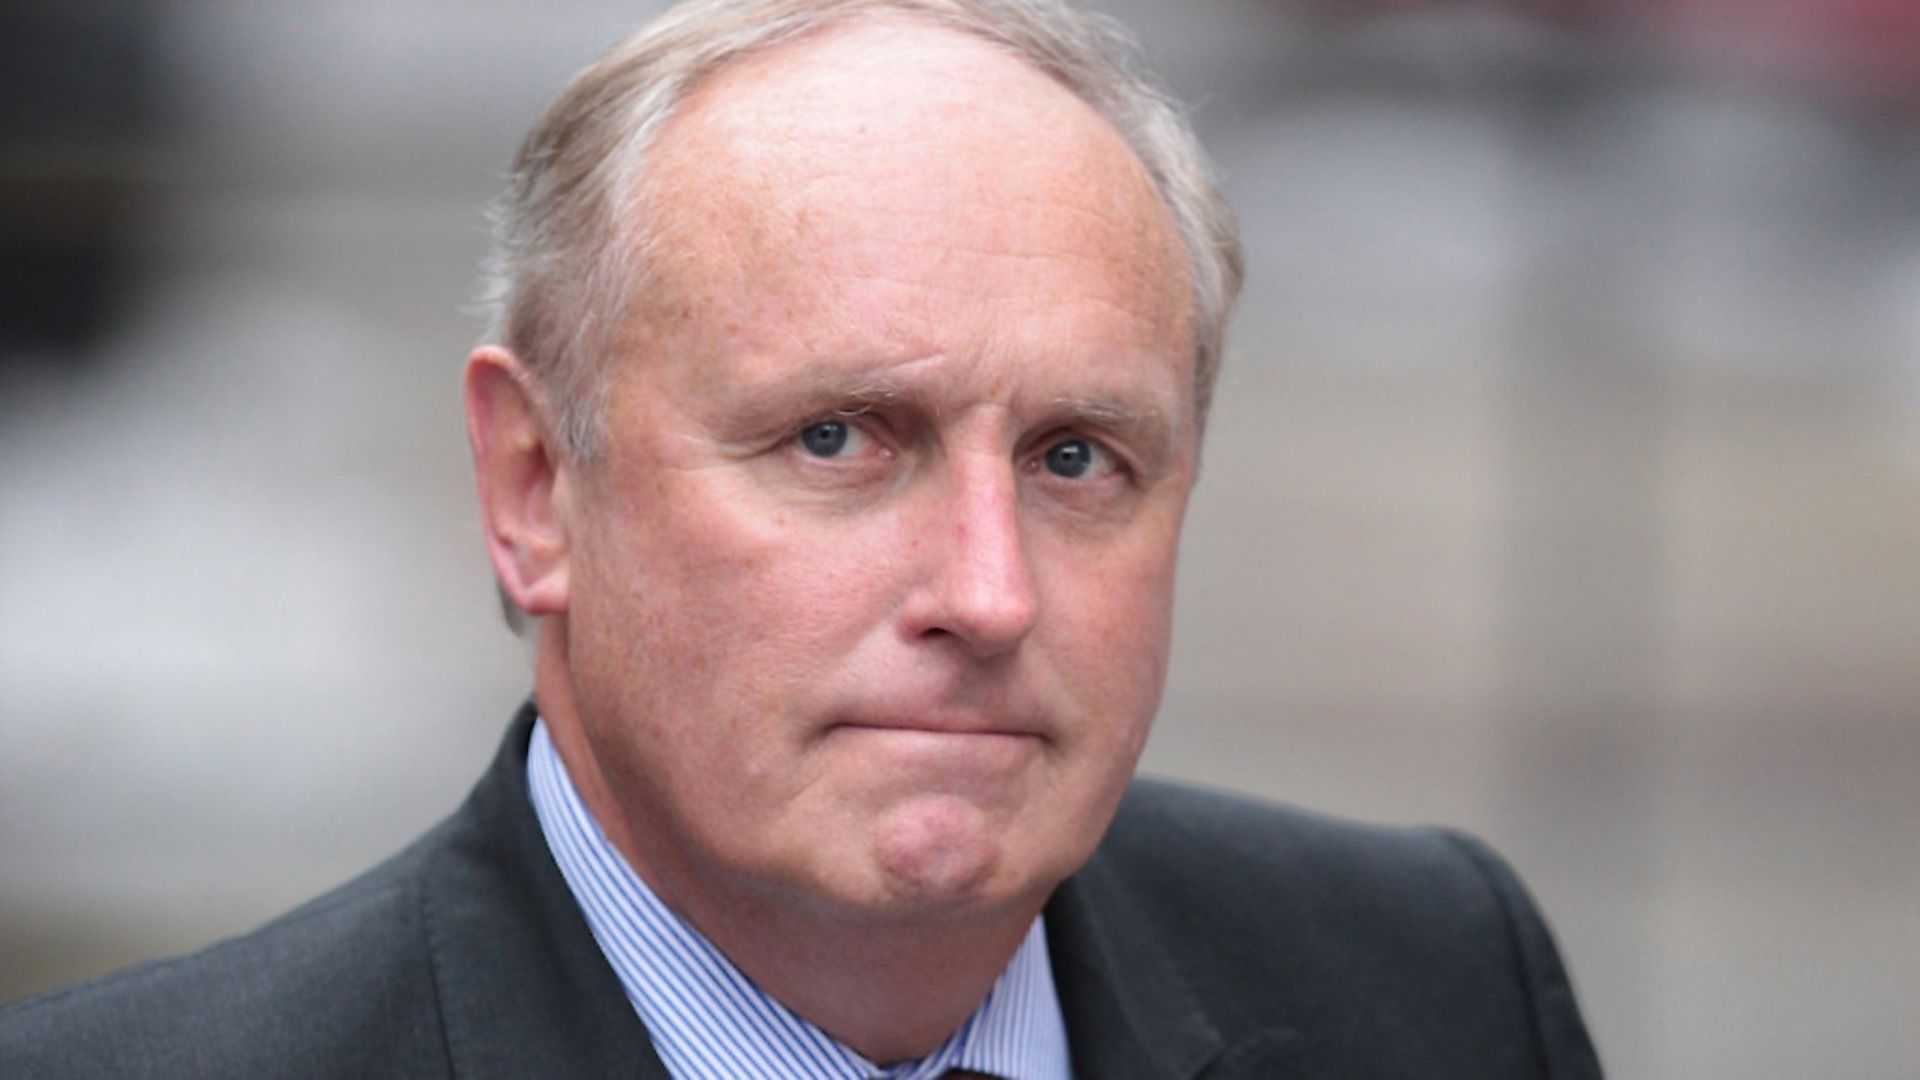 Former Daily Mail editor Paul Dacre did not receive a gong in the New Year's Honours list. Photo: Getty - Credit: Getty Images